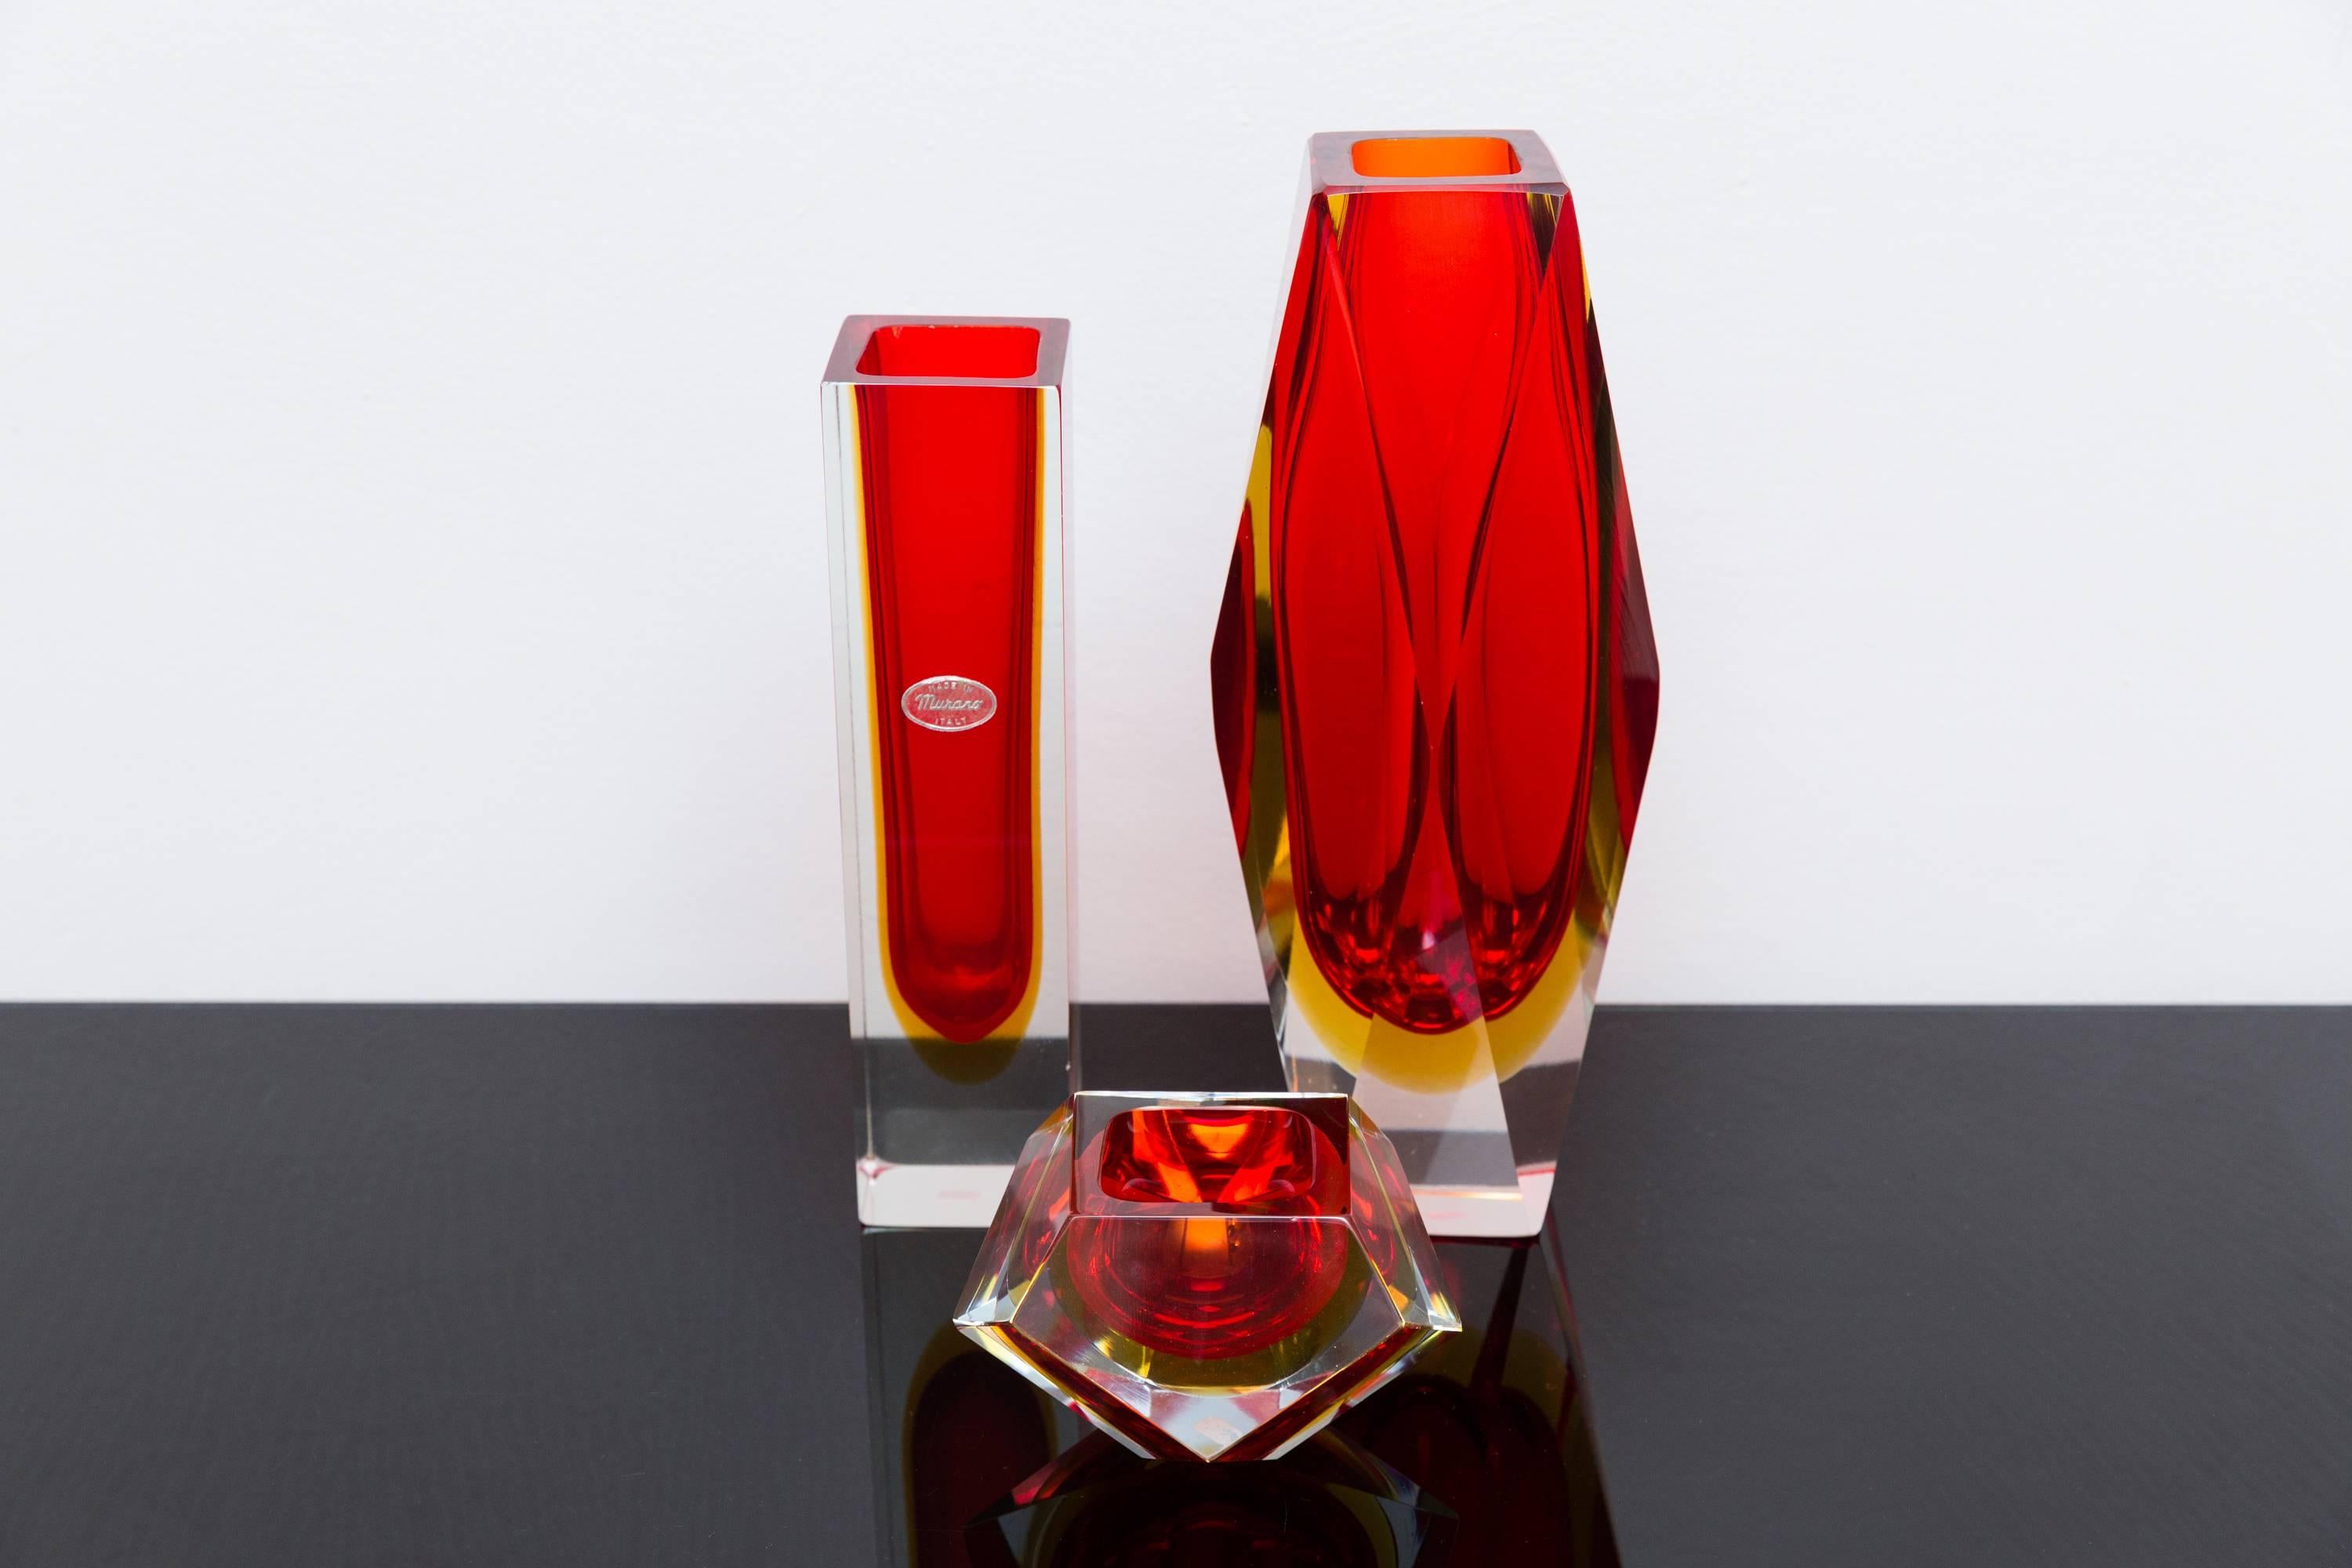 Set of three red color Murano glass vases, Prod. Sommerso, Italy, circa 1960
Big red and orange vase measures height 30 cm, width 12 cm
Smaller red and orange block vase, marked with the original Murano glass sticker, height 25 cm, width 6,5